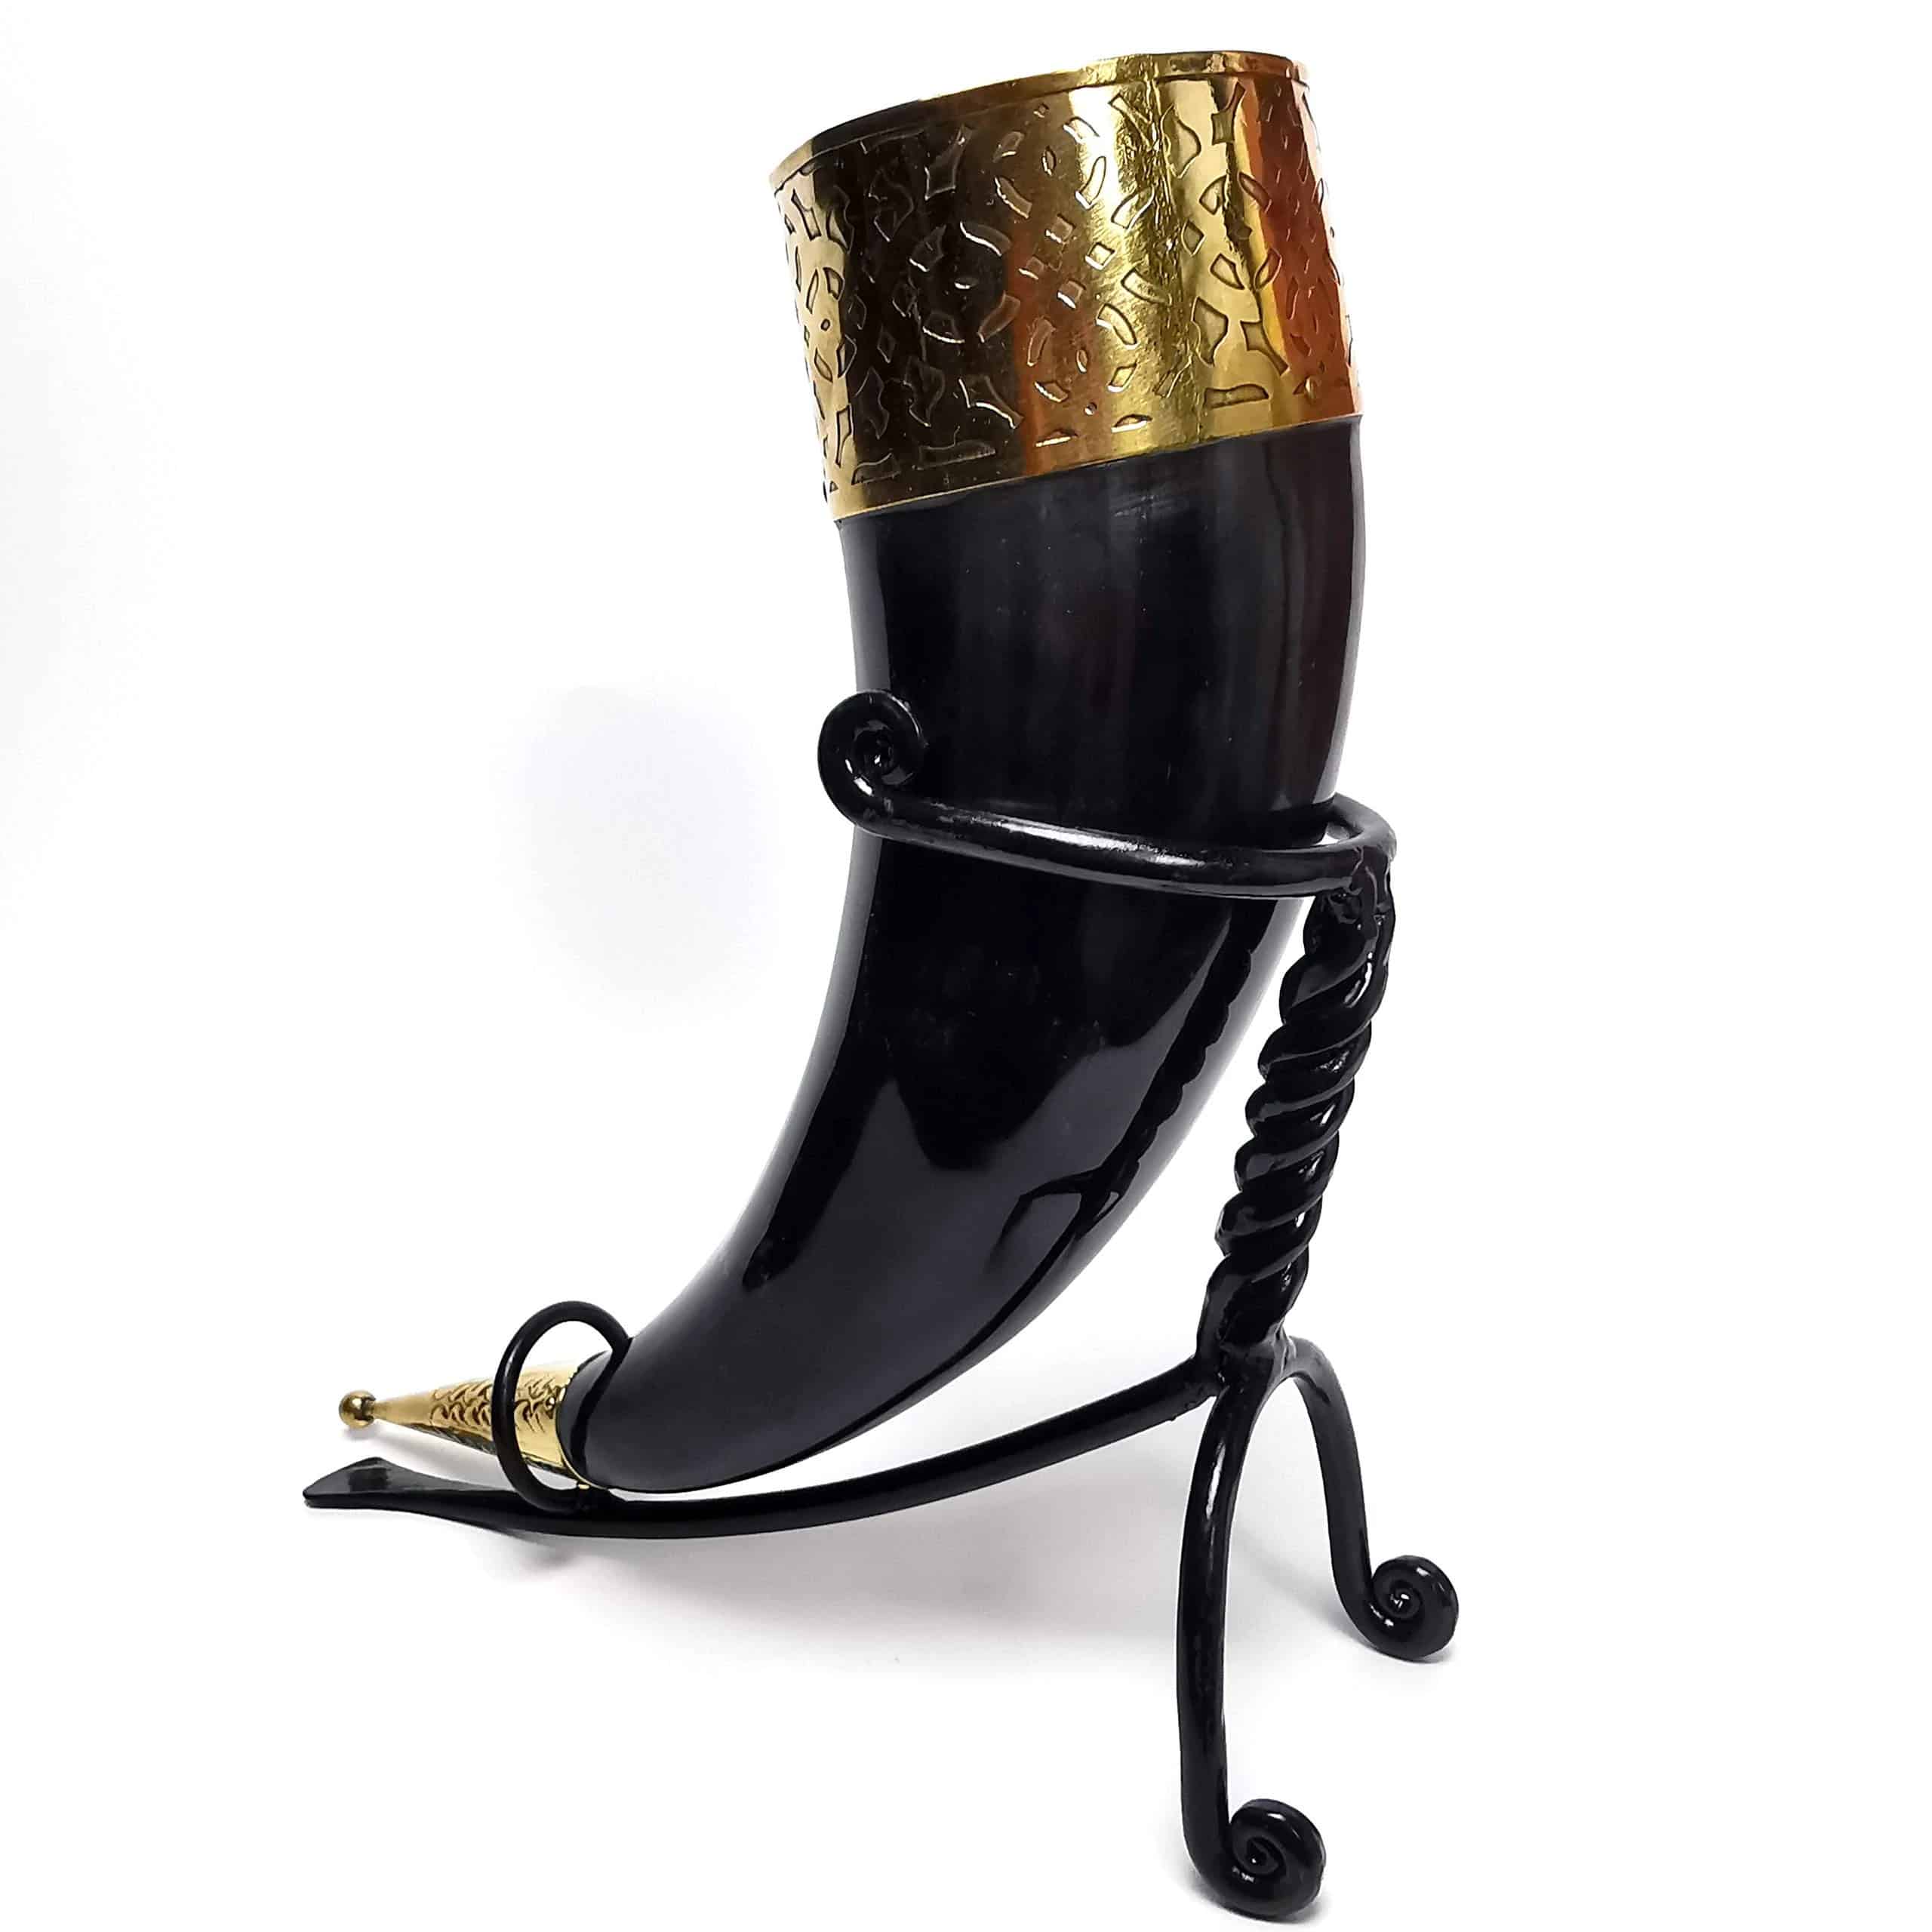 Brass Rim Drinking Horn with Horn Stand